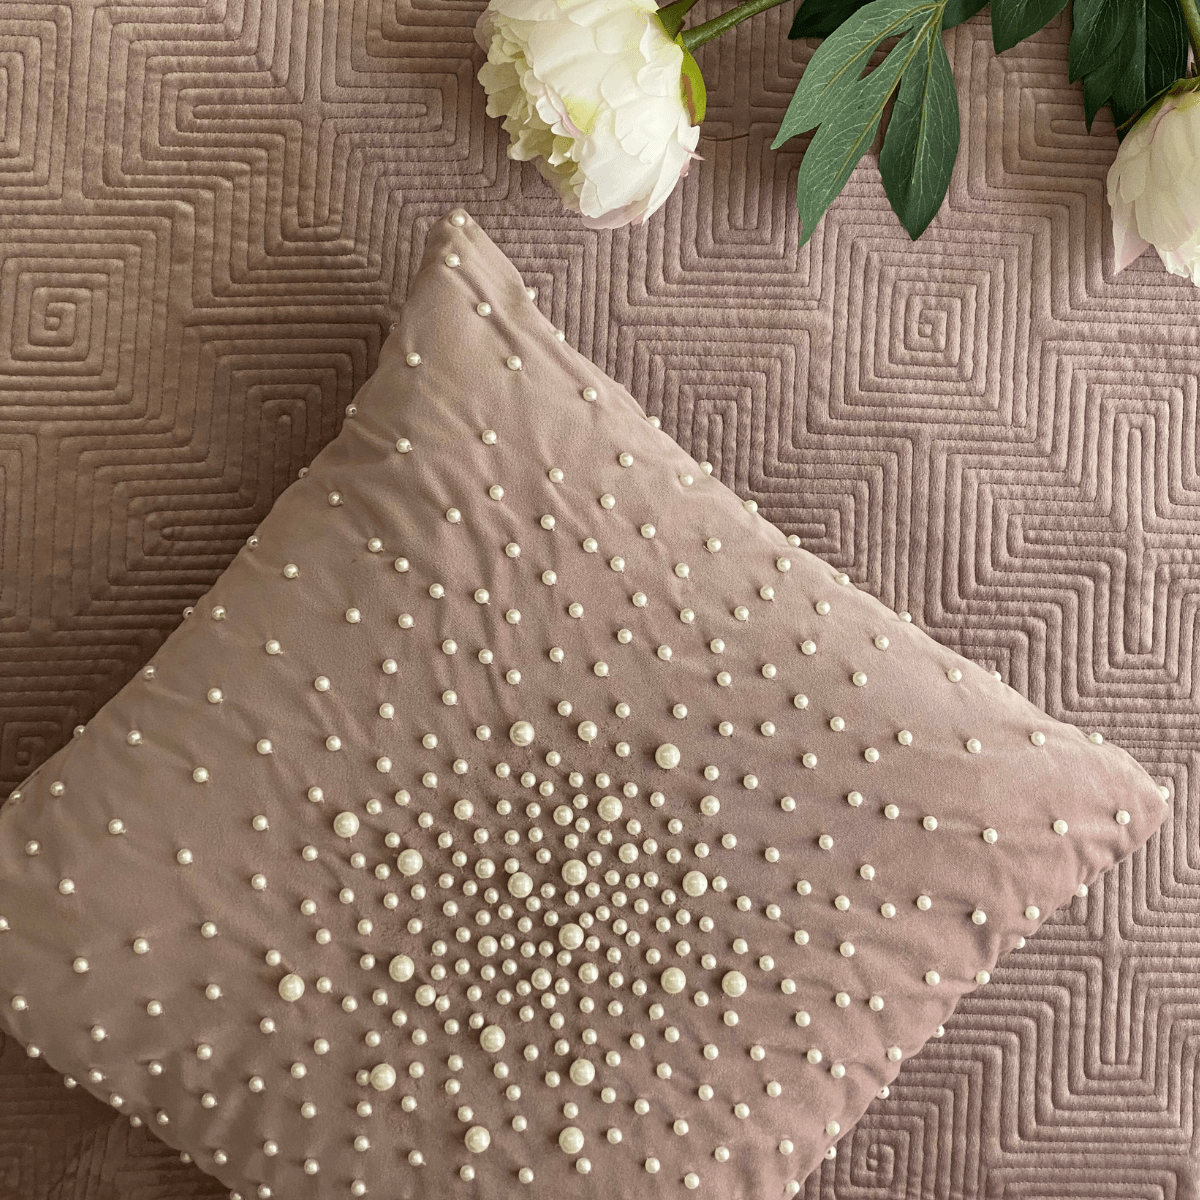 Decorative Pearl Onion Pink Velvet Cushion Cover 16x16